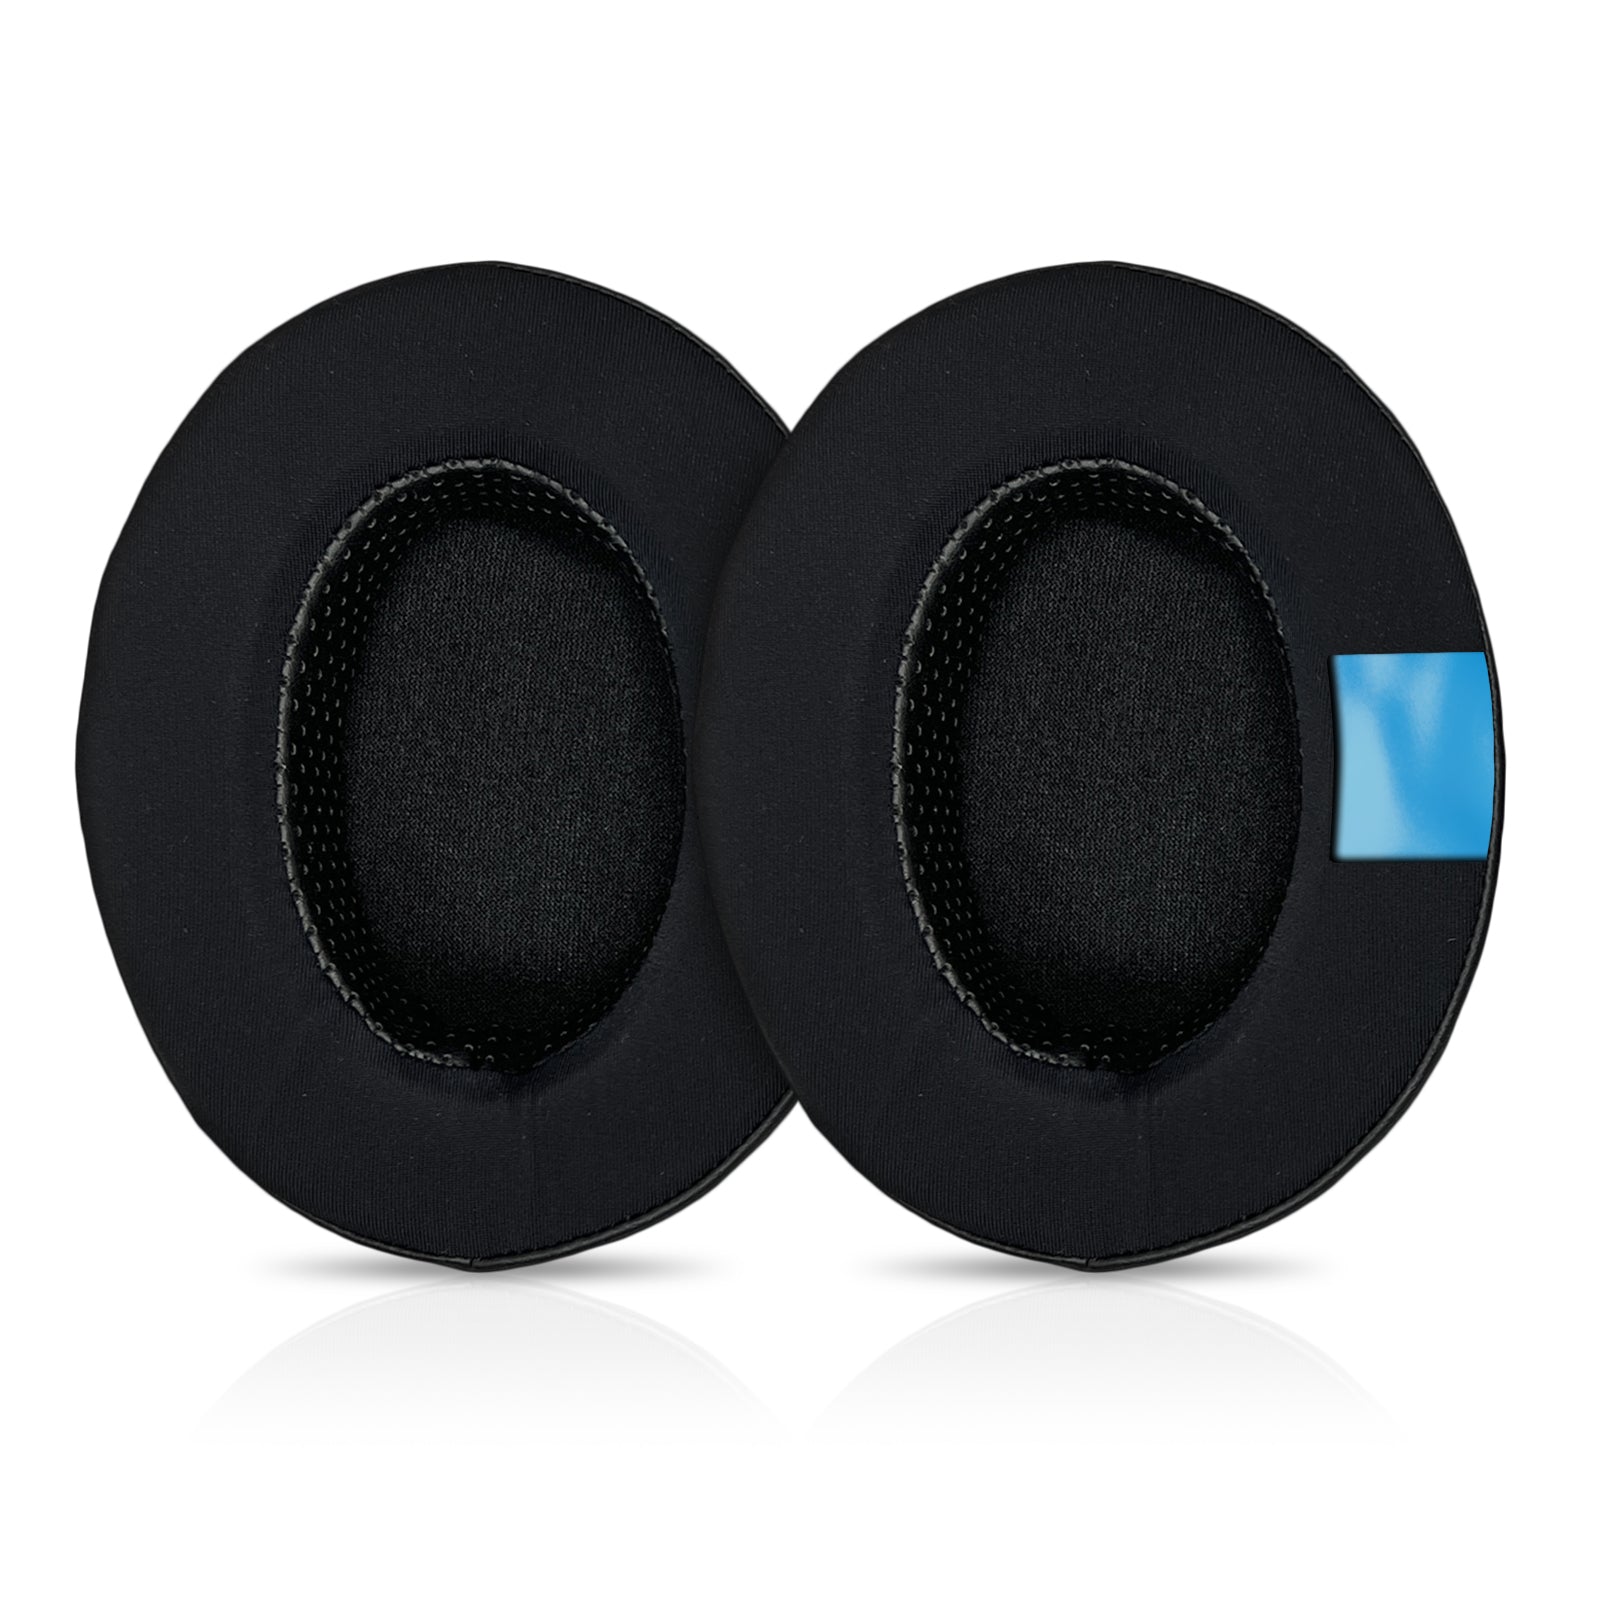 CentralSound Coolers XL Cooling Gel and Memory Foam Oval Ear Pad Cushions